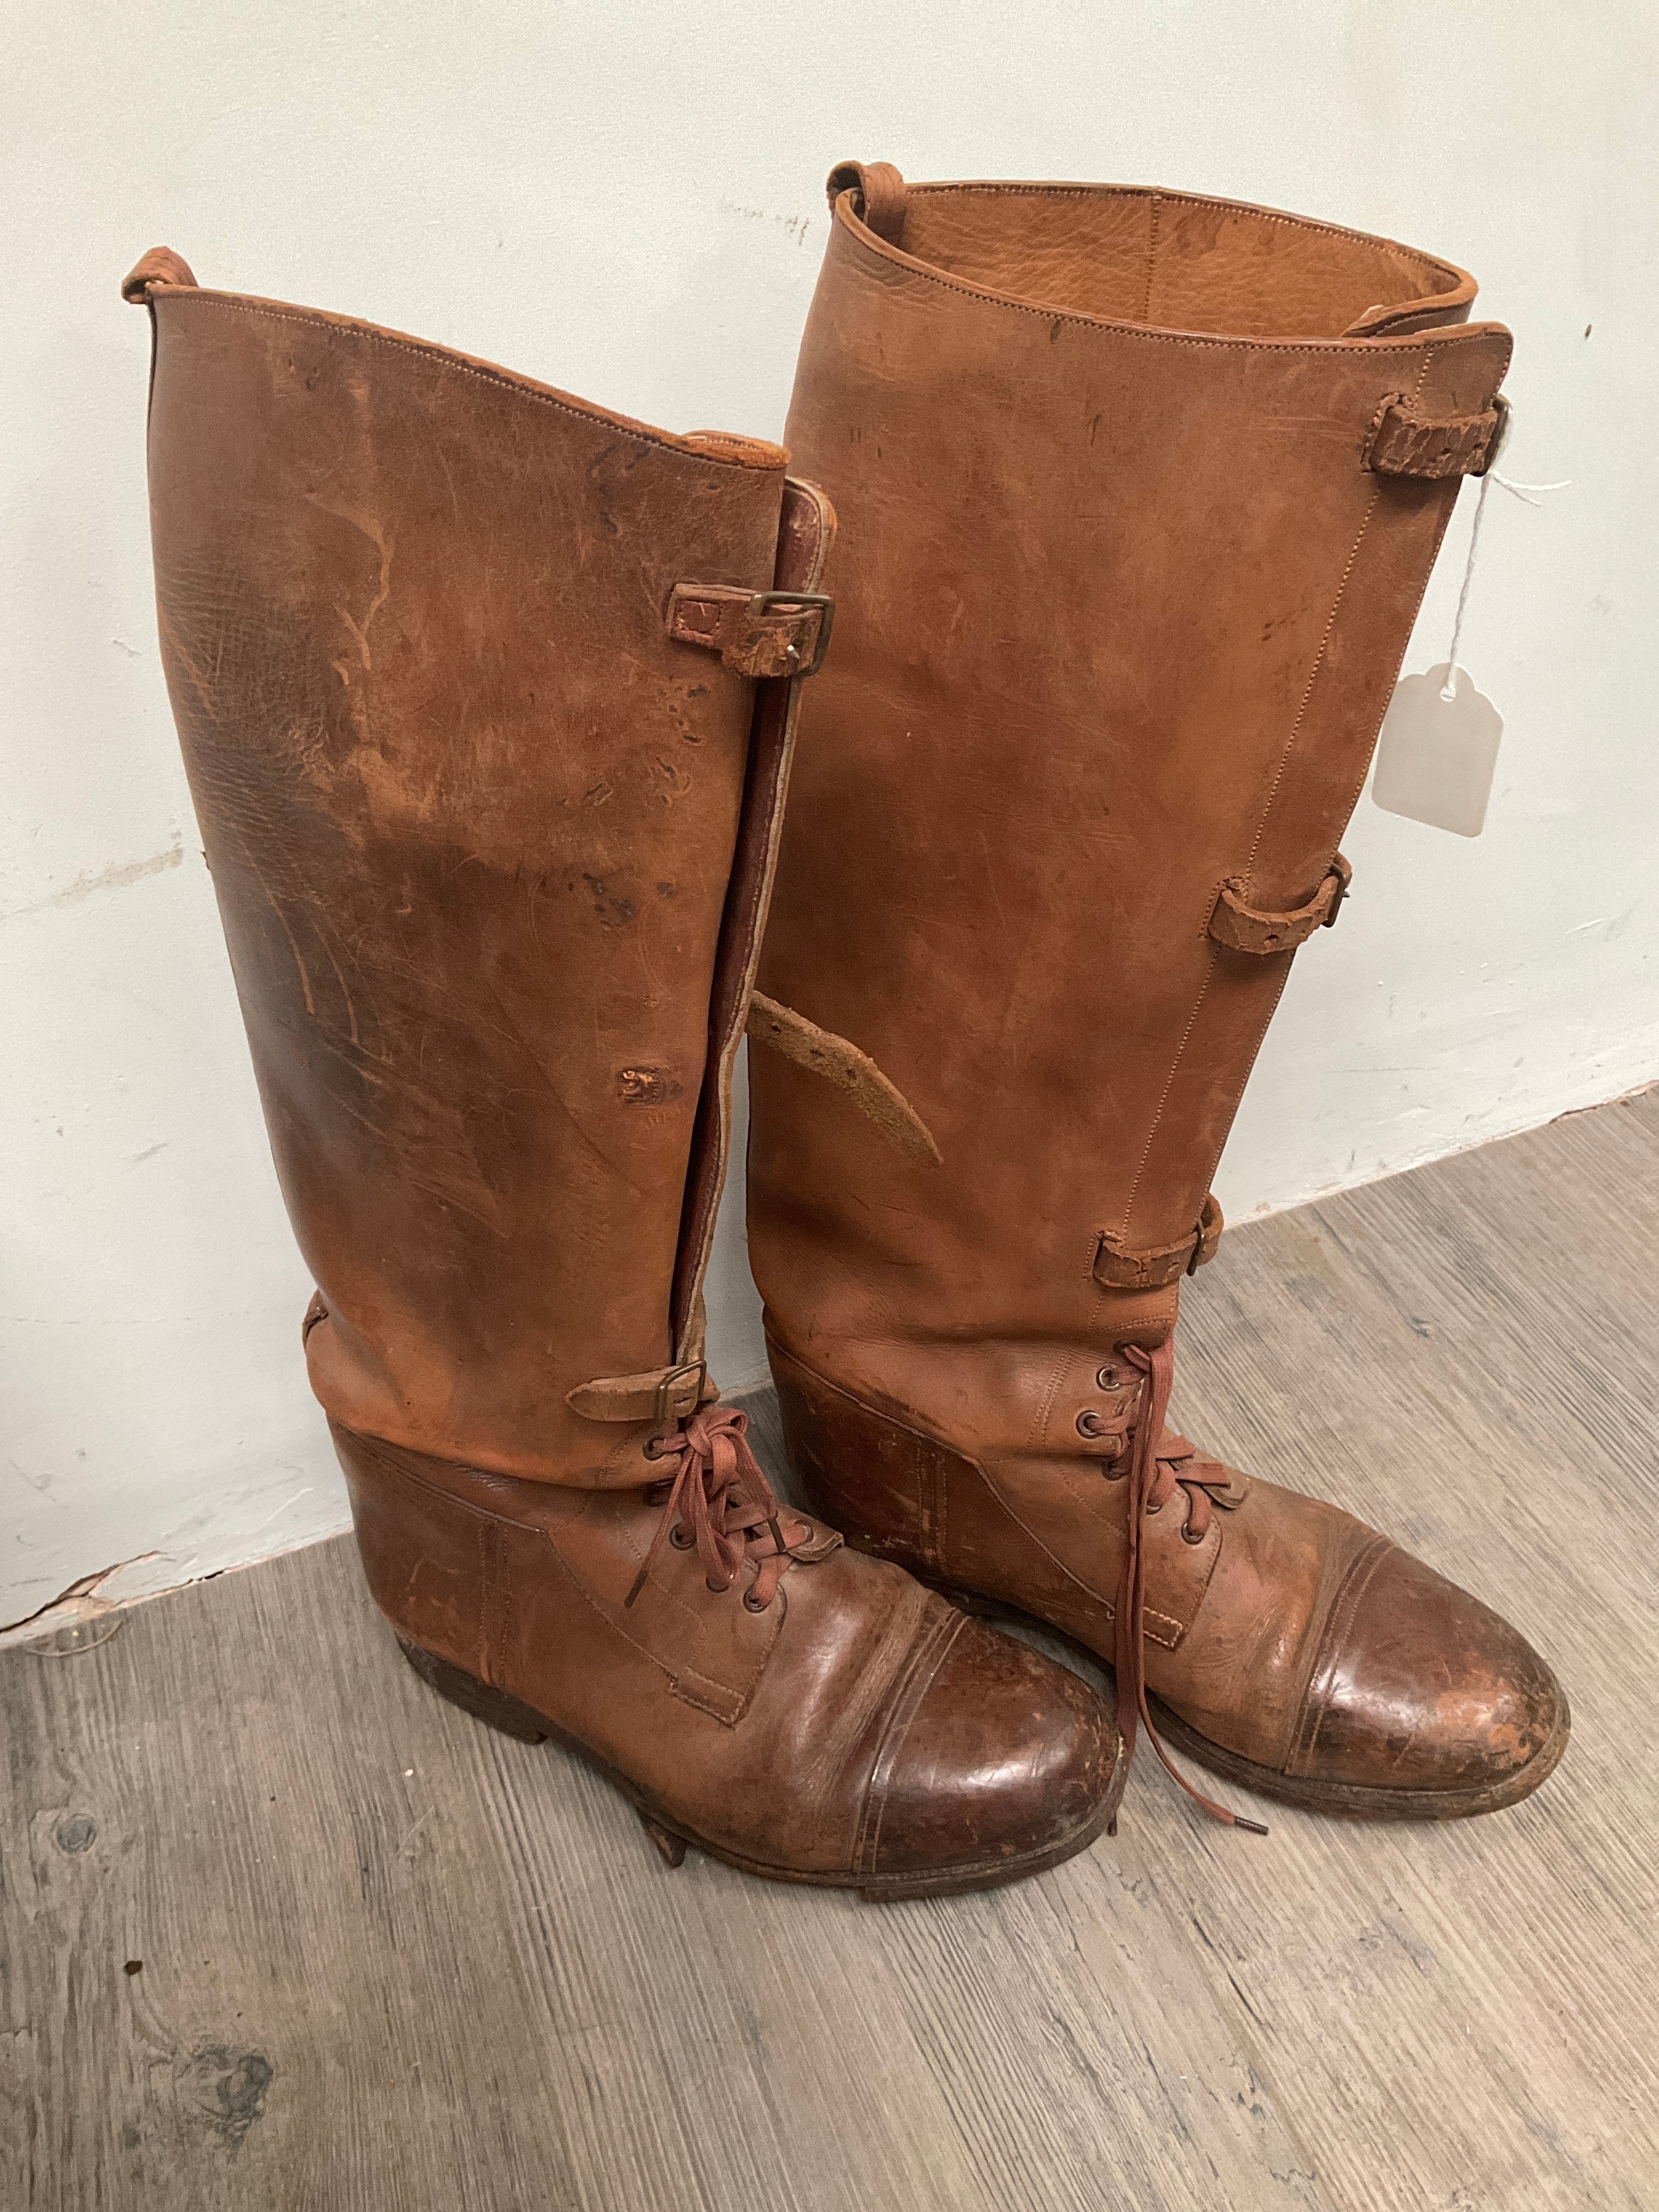 A pair of WWI era British officer's field boots, some damage - Image 2 of 2